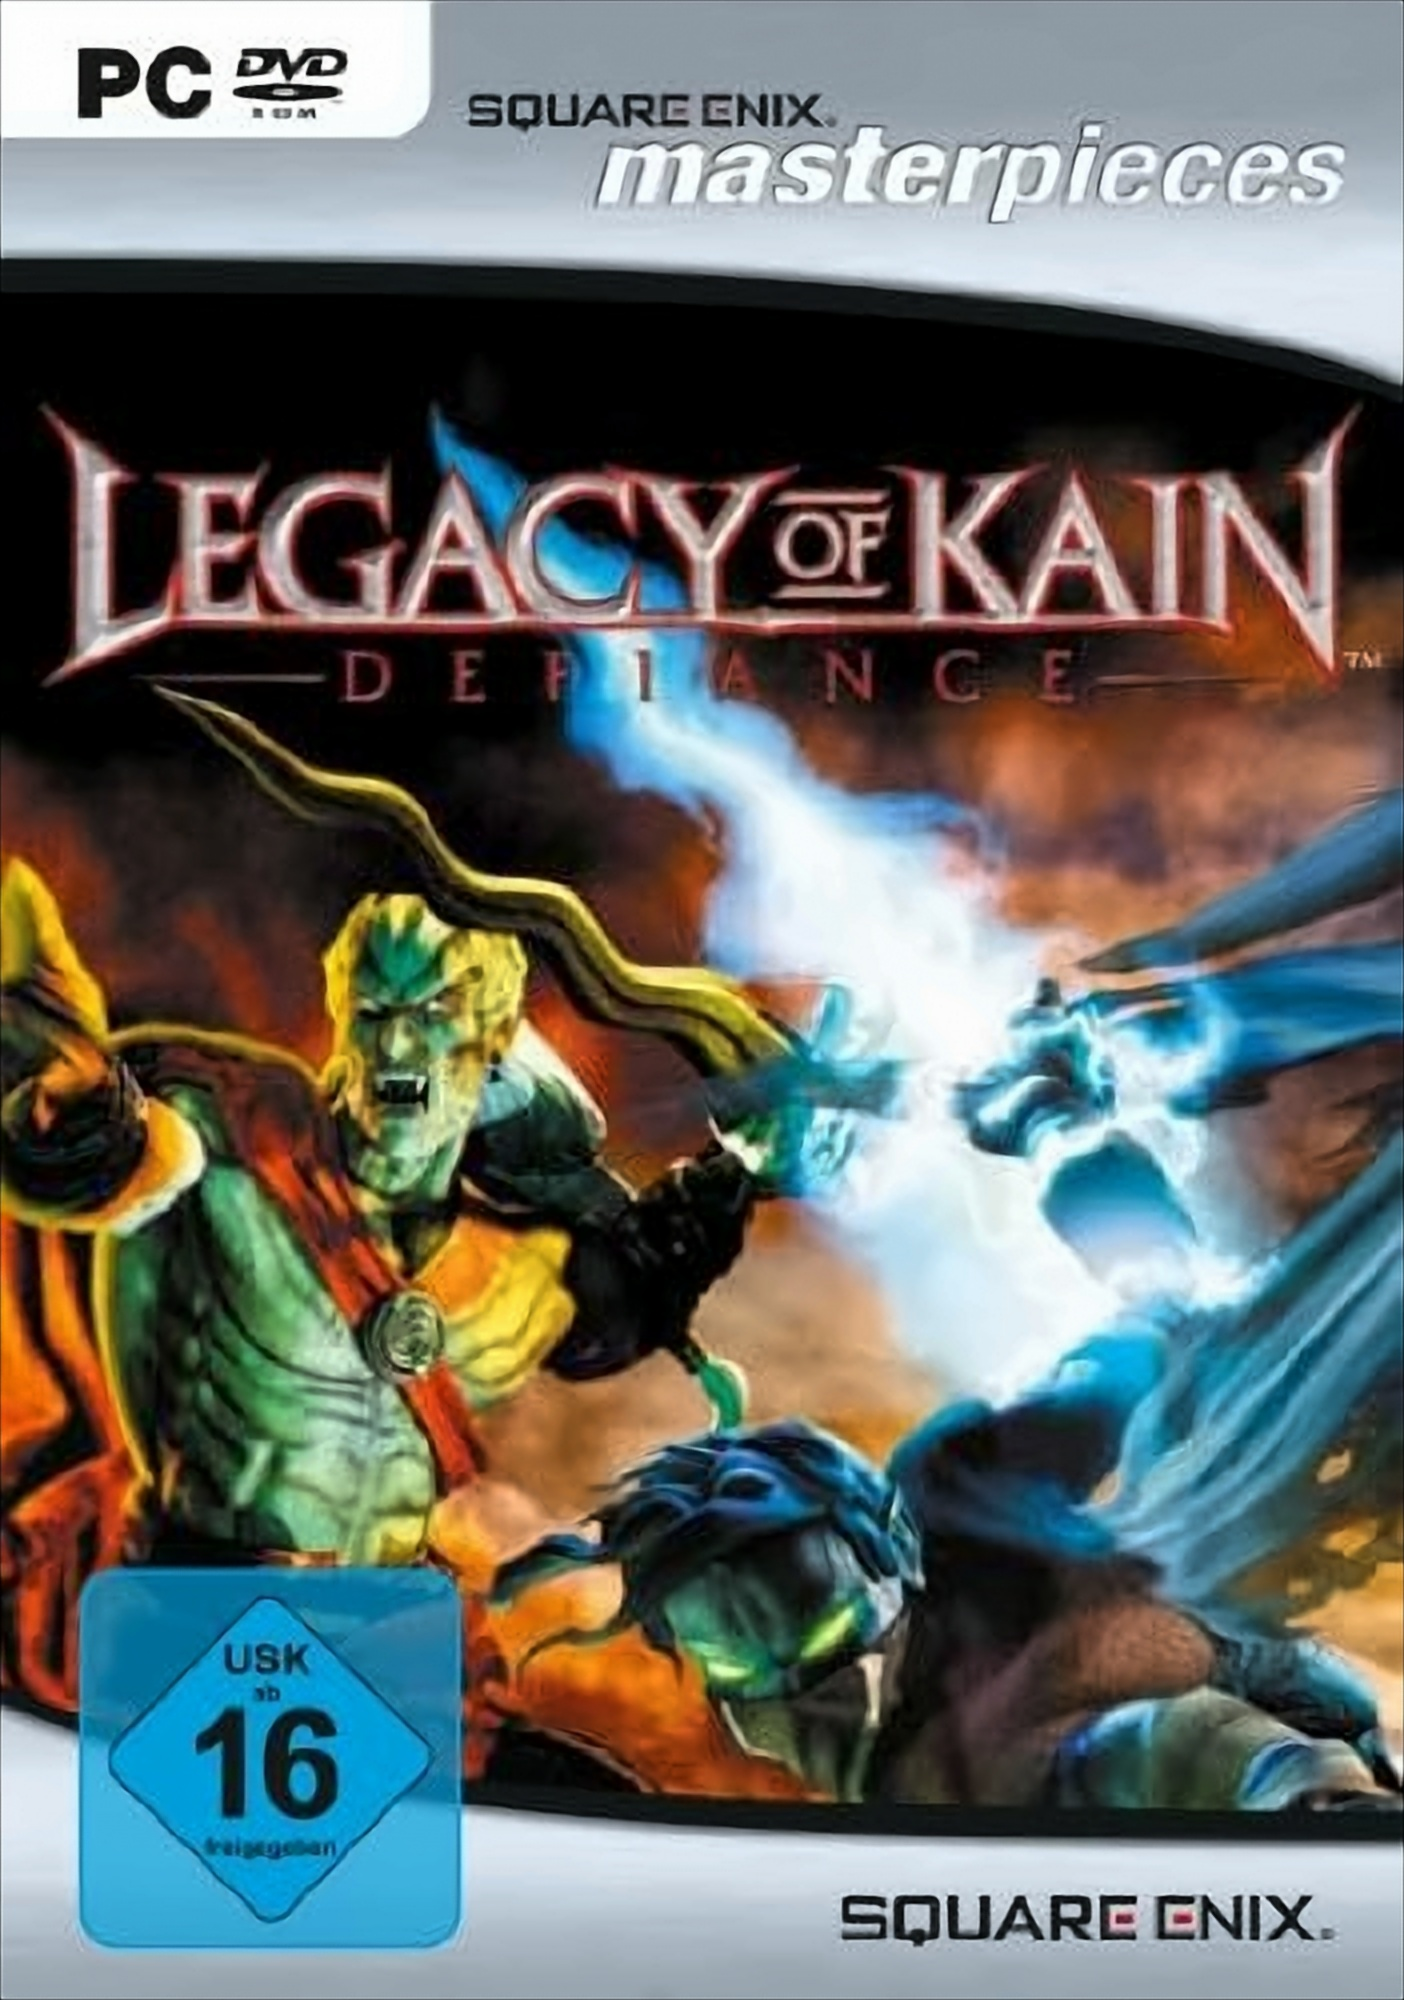 Defiance - [PC] Legacy Kain: Of